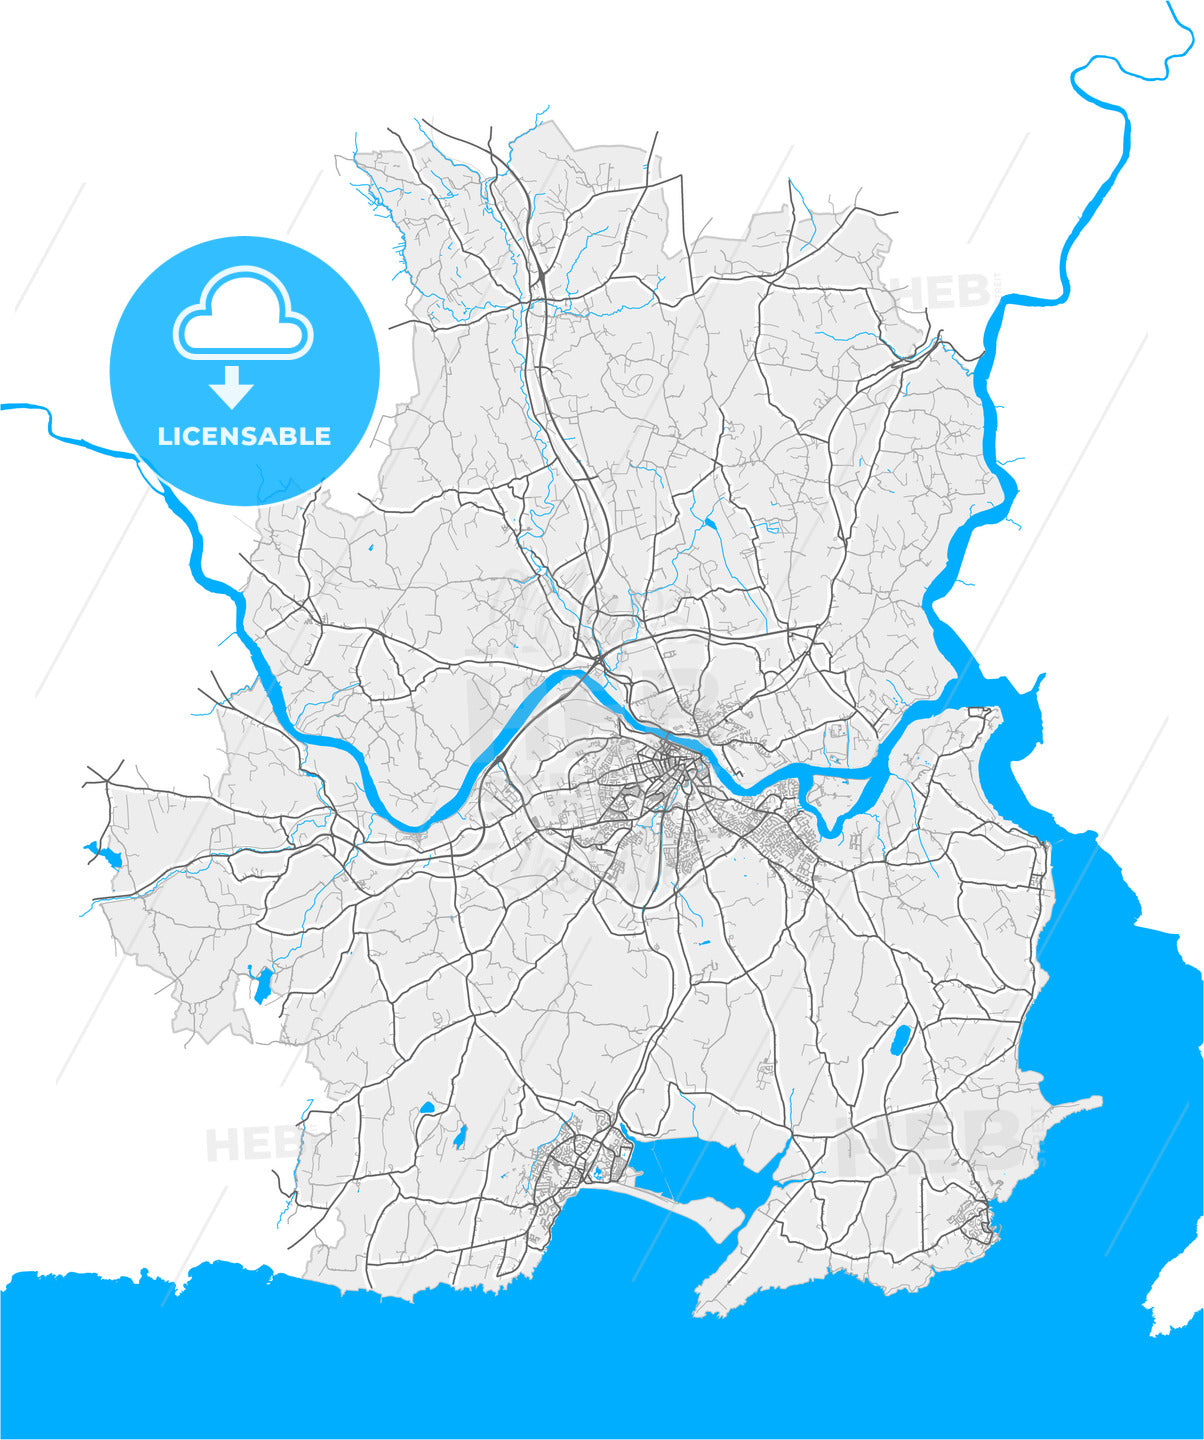 Waterford, County Waterford &amp; County Kilkenny, Ireland, high quality vector map